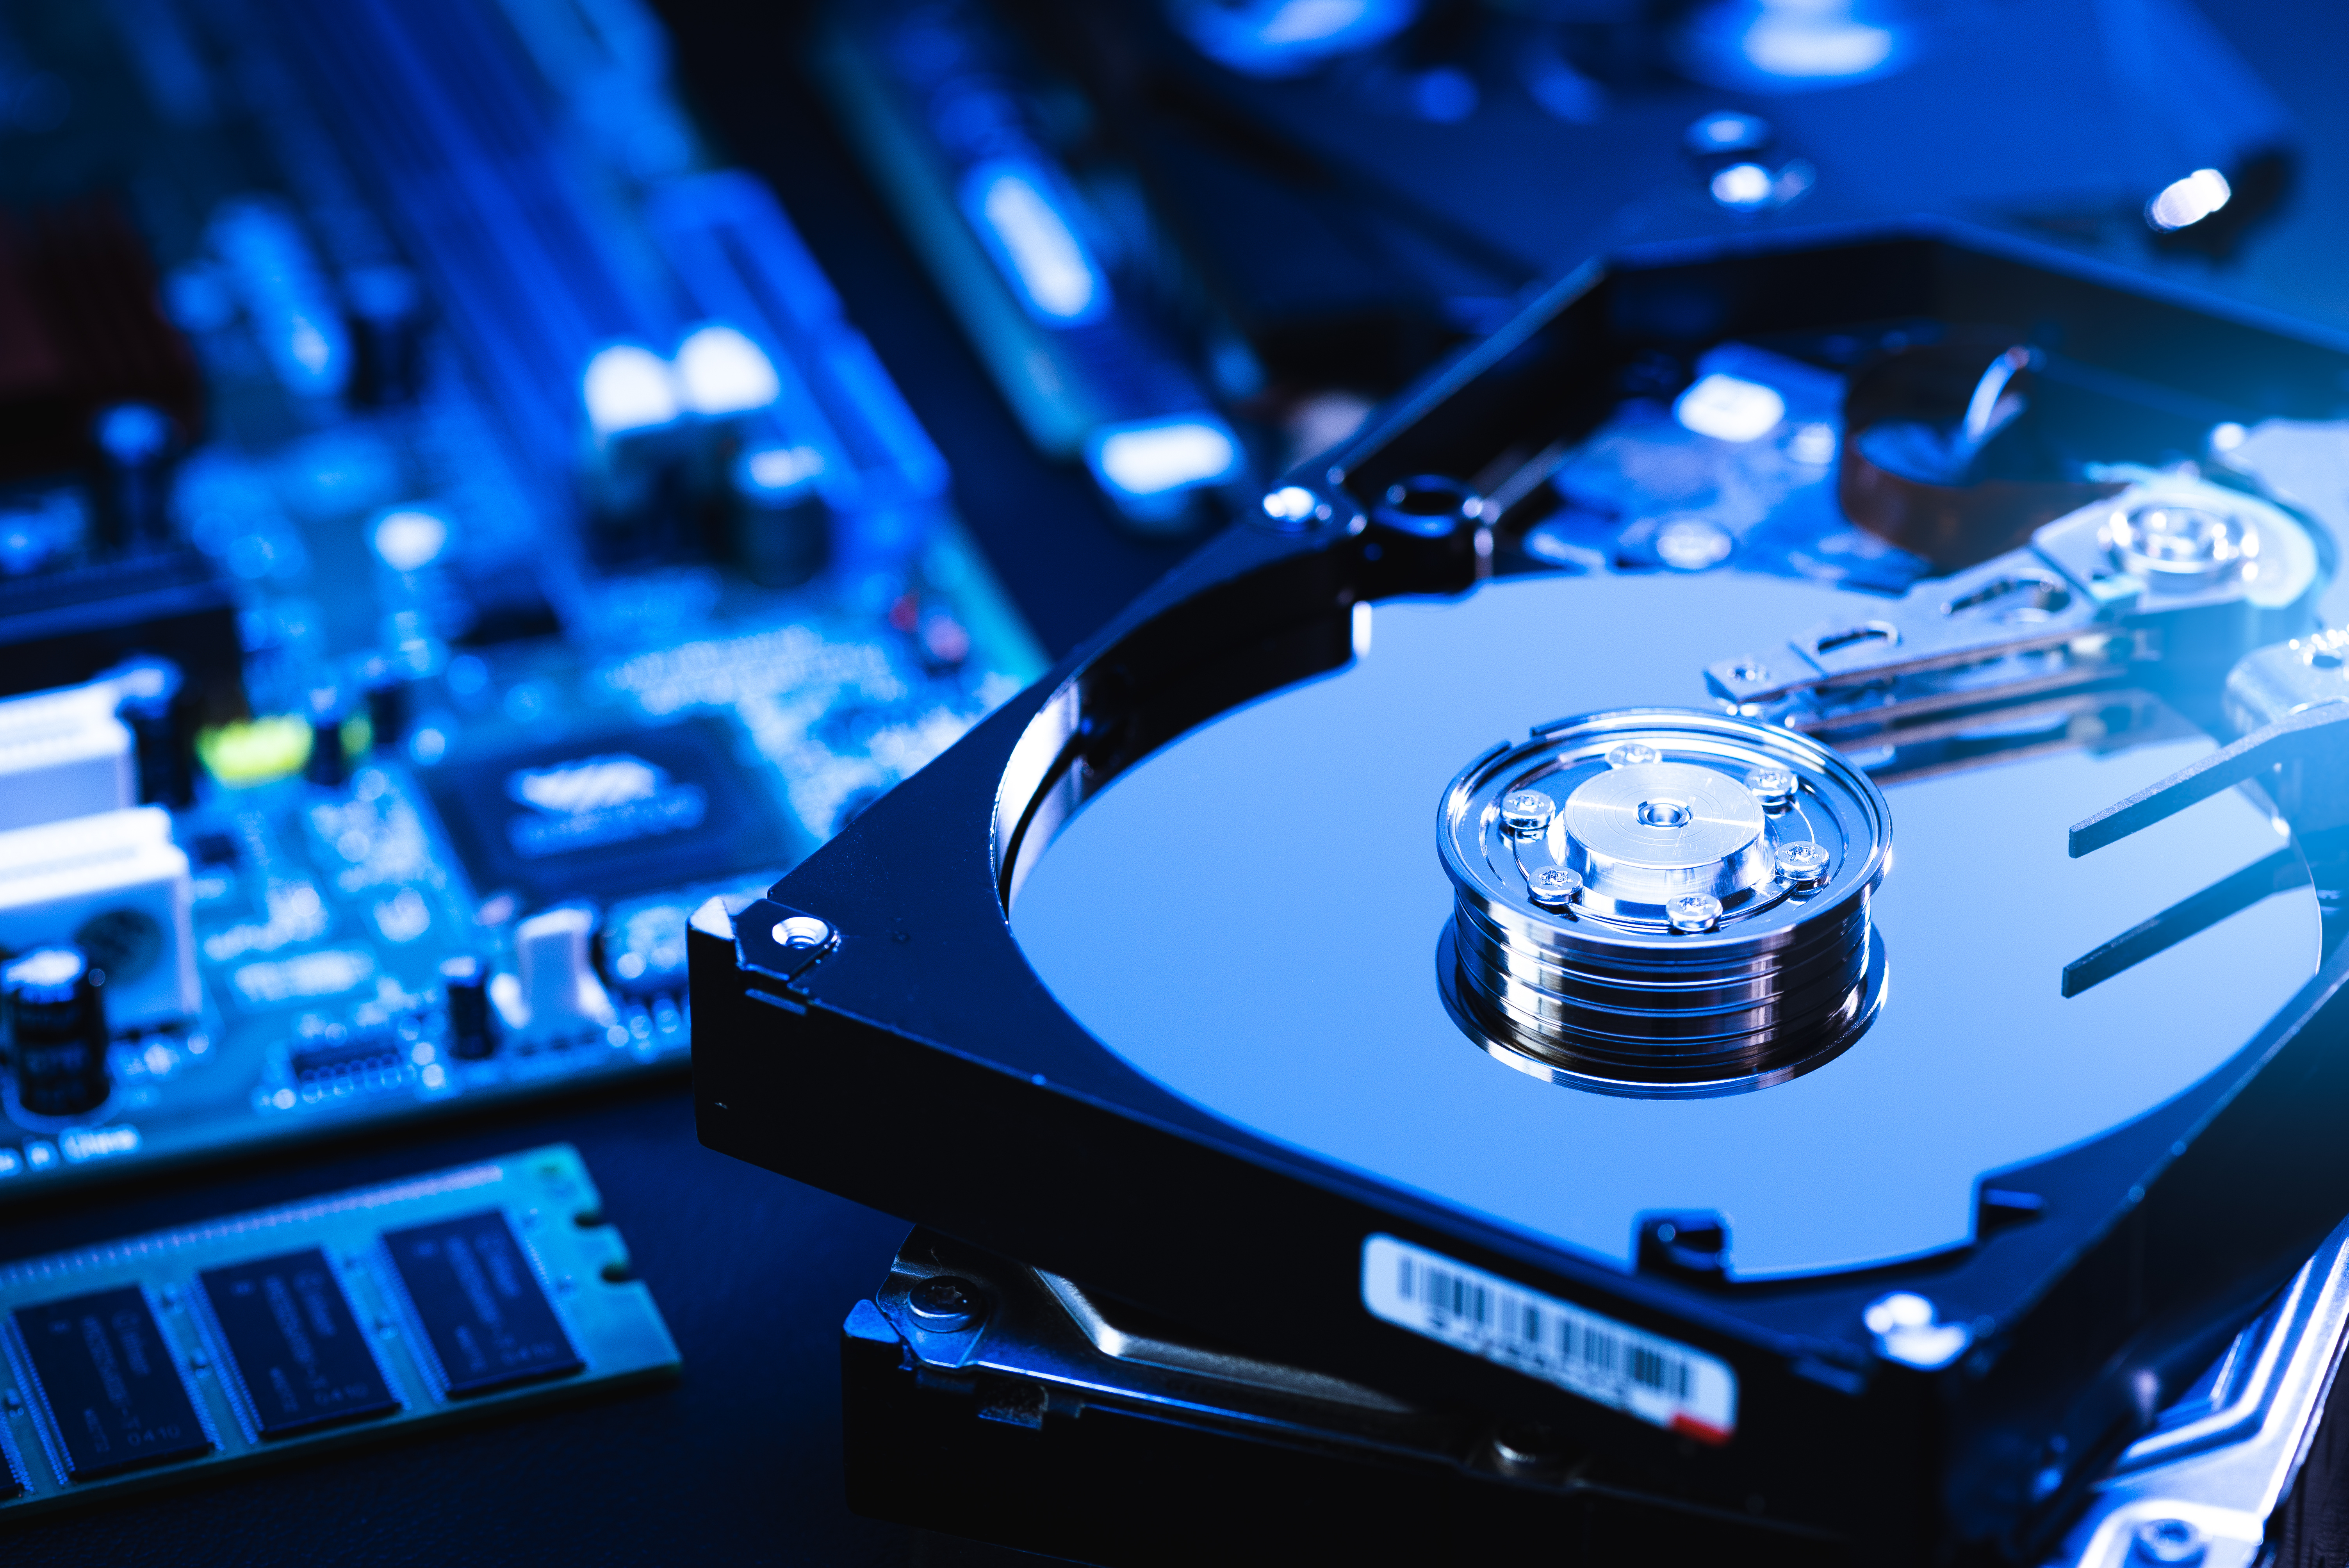 Top 5 Manufacturers of Self-Encrypting Drives (SEDs)